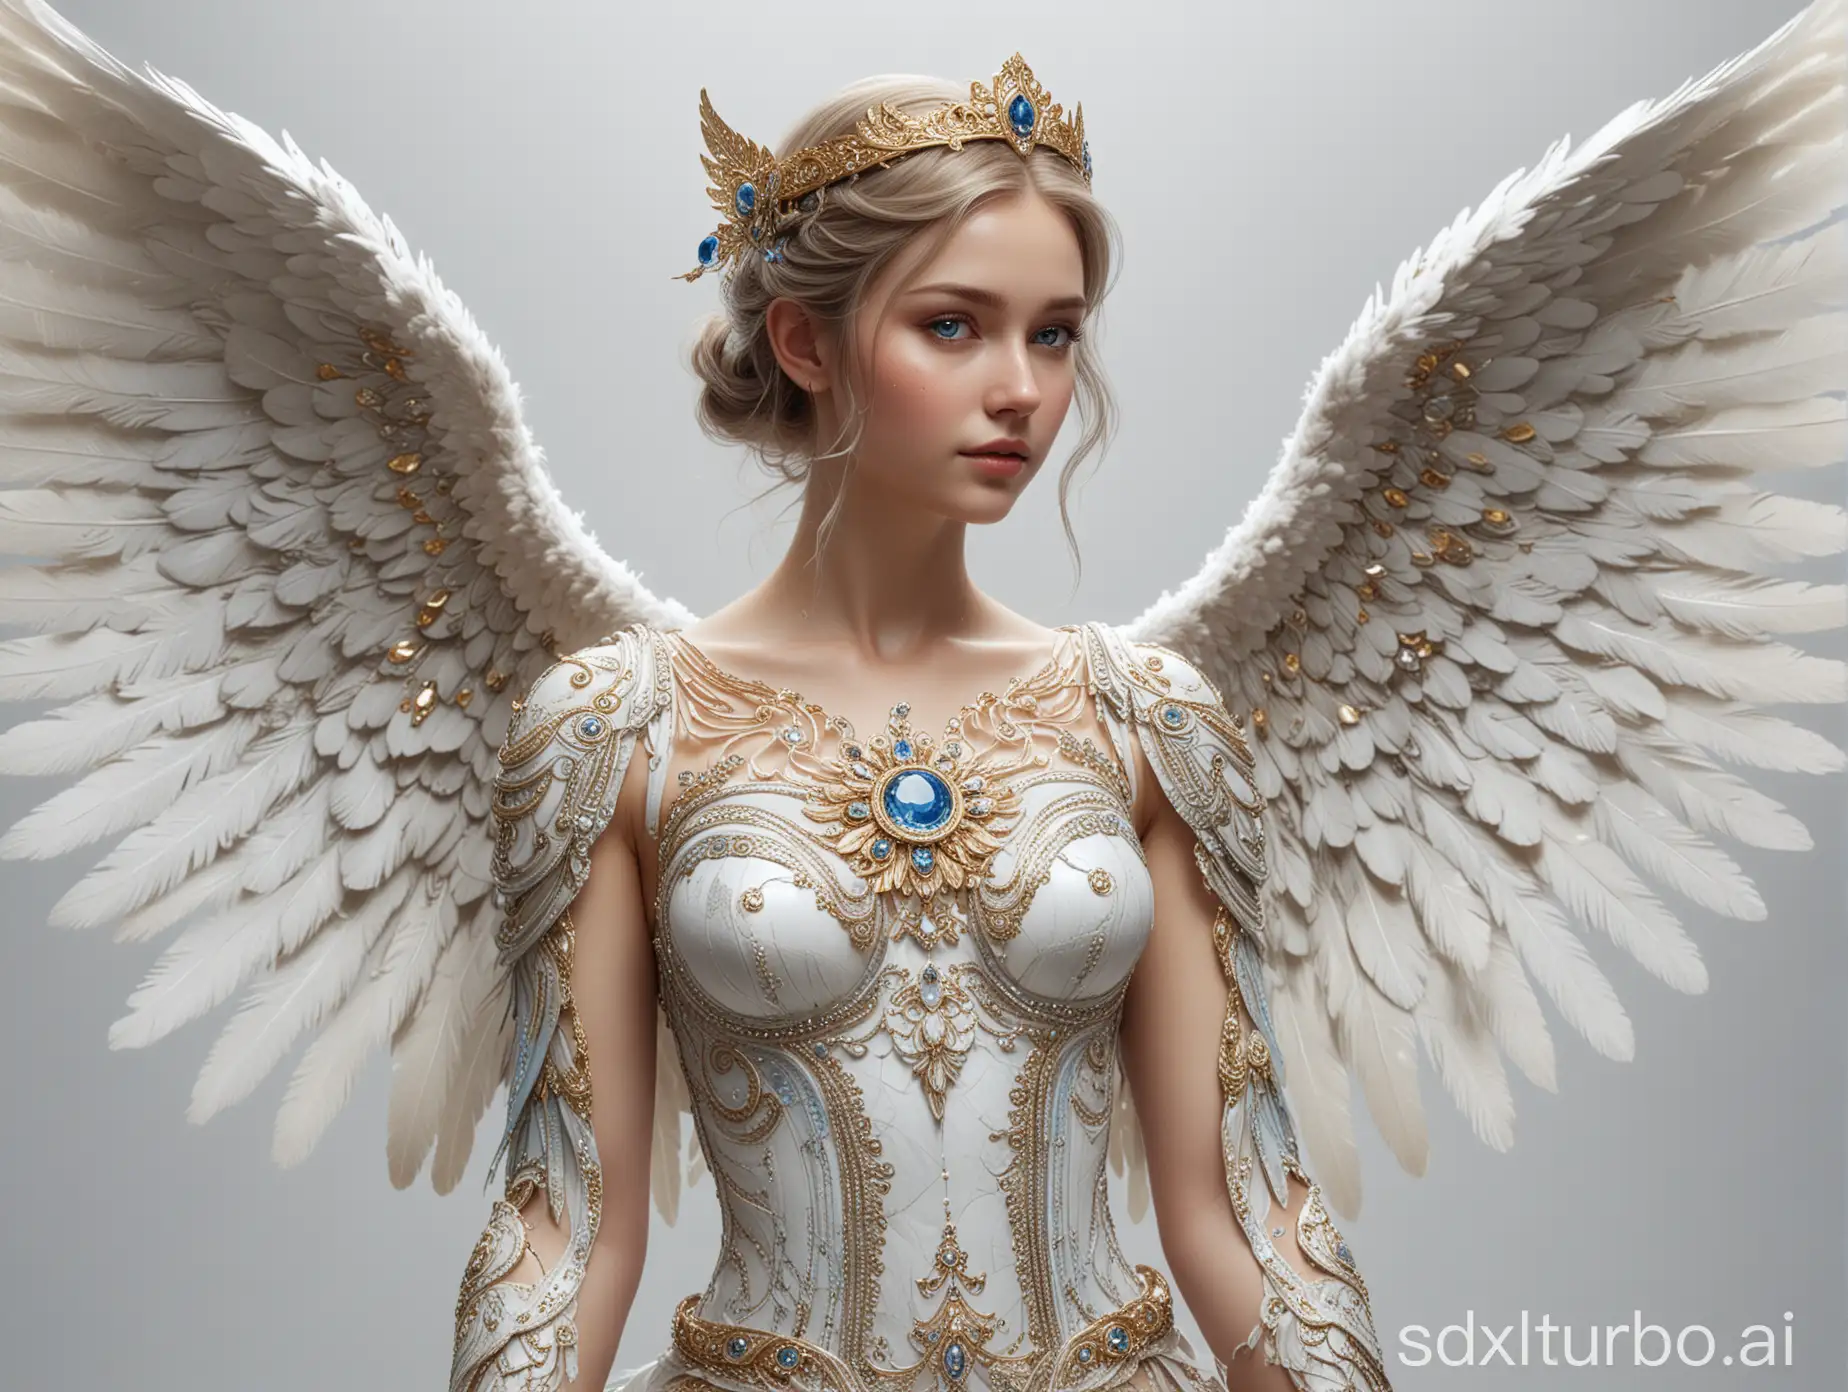 A RAW image of a magnificent angel with wings in a full-body shot from a distance of 15 meters, showing clean hands and fingers as they put high heels shoes and shining gems on wing tips. The entire body and wings are in sharp focus, with striking blue eyes, detailed face and skin texture, and outstretched wings adorned with gold and silver tips and intricate, ornate feathers with marble and bone patterns in a spiral design reminiscent of Final Fantasy. The image is stunningly beautiful, with the goddess-like angel wearing translucent garments, well-suited for both photography and artistic representation in 8k resolution, high detail, realistic lighting, focusing on hands and face, painted style, strong composition, and winning awards with a simple white background.